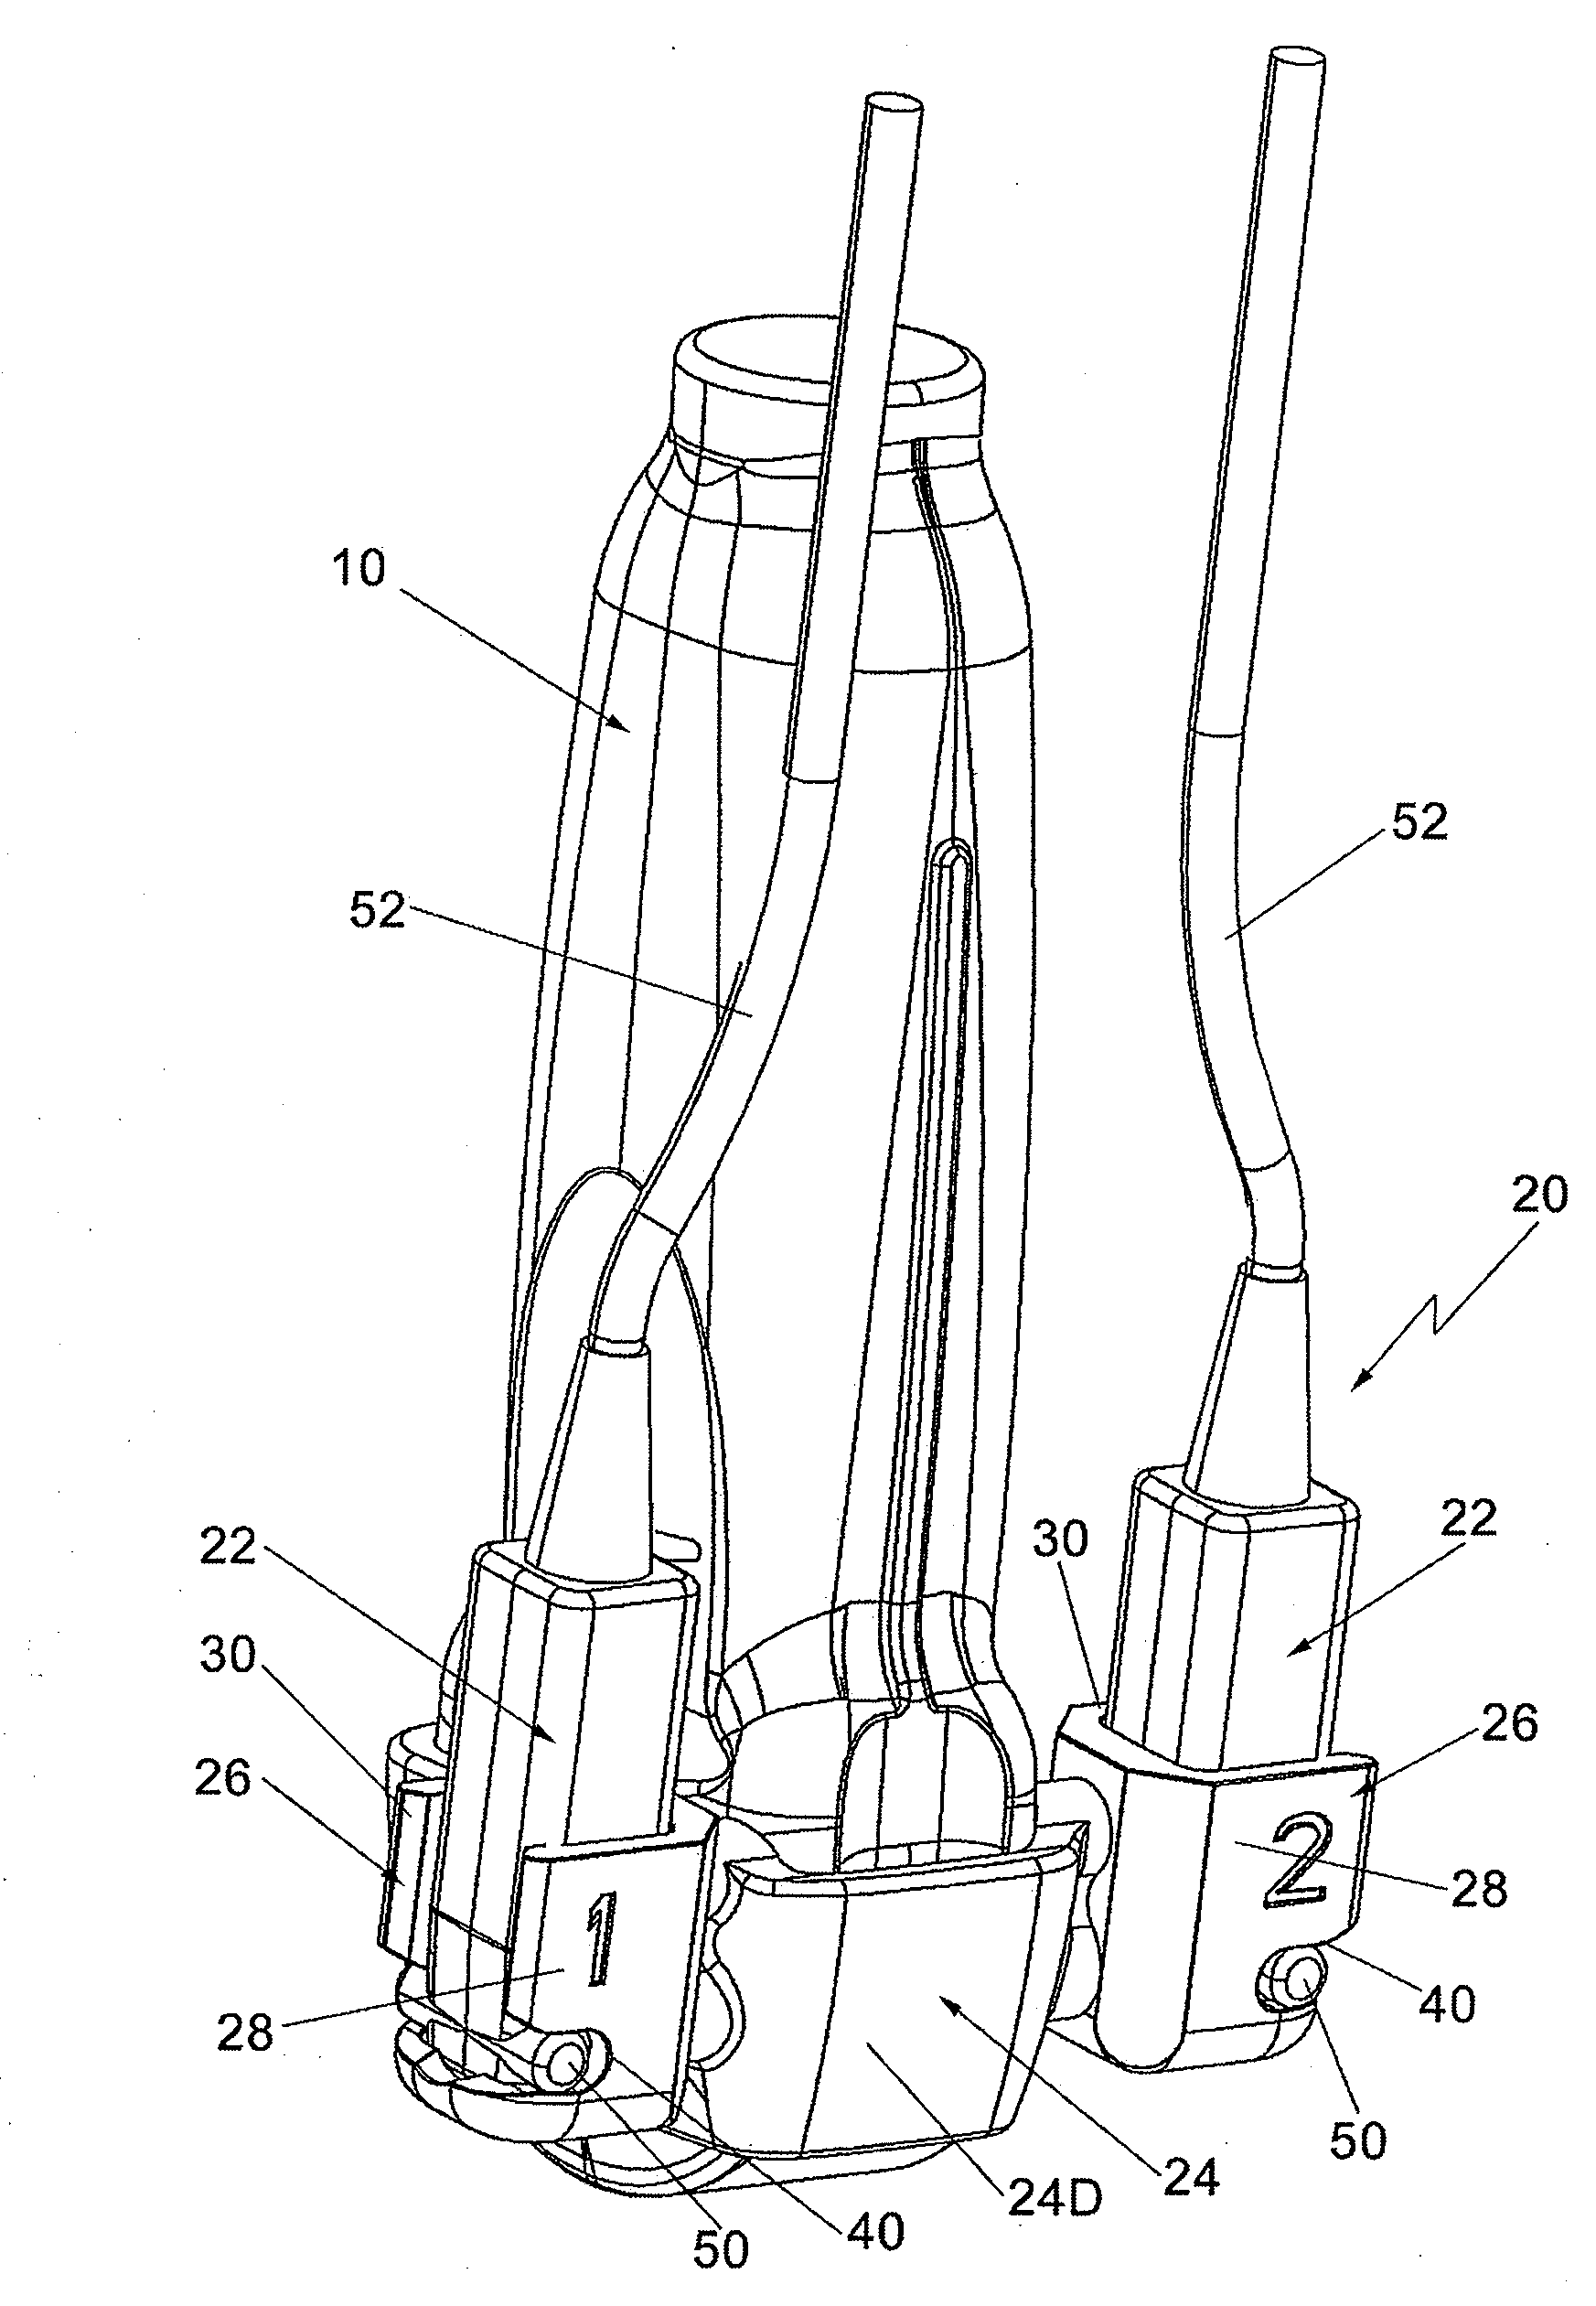 Bracket for mounting at least one position detecting sensor on an ultrasonic probe